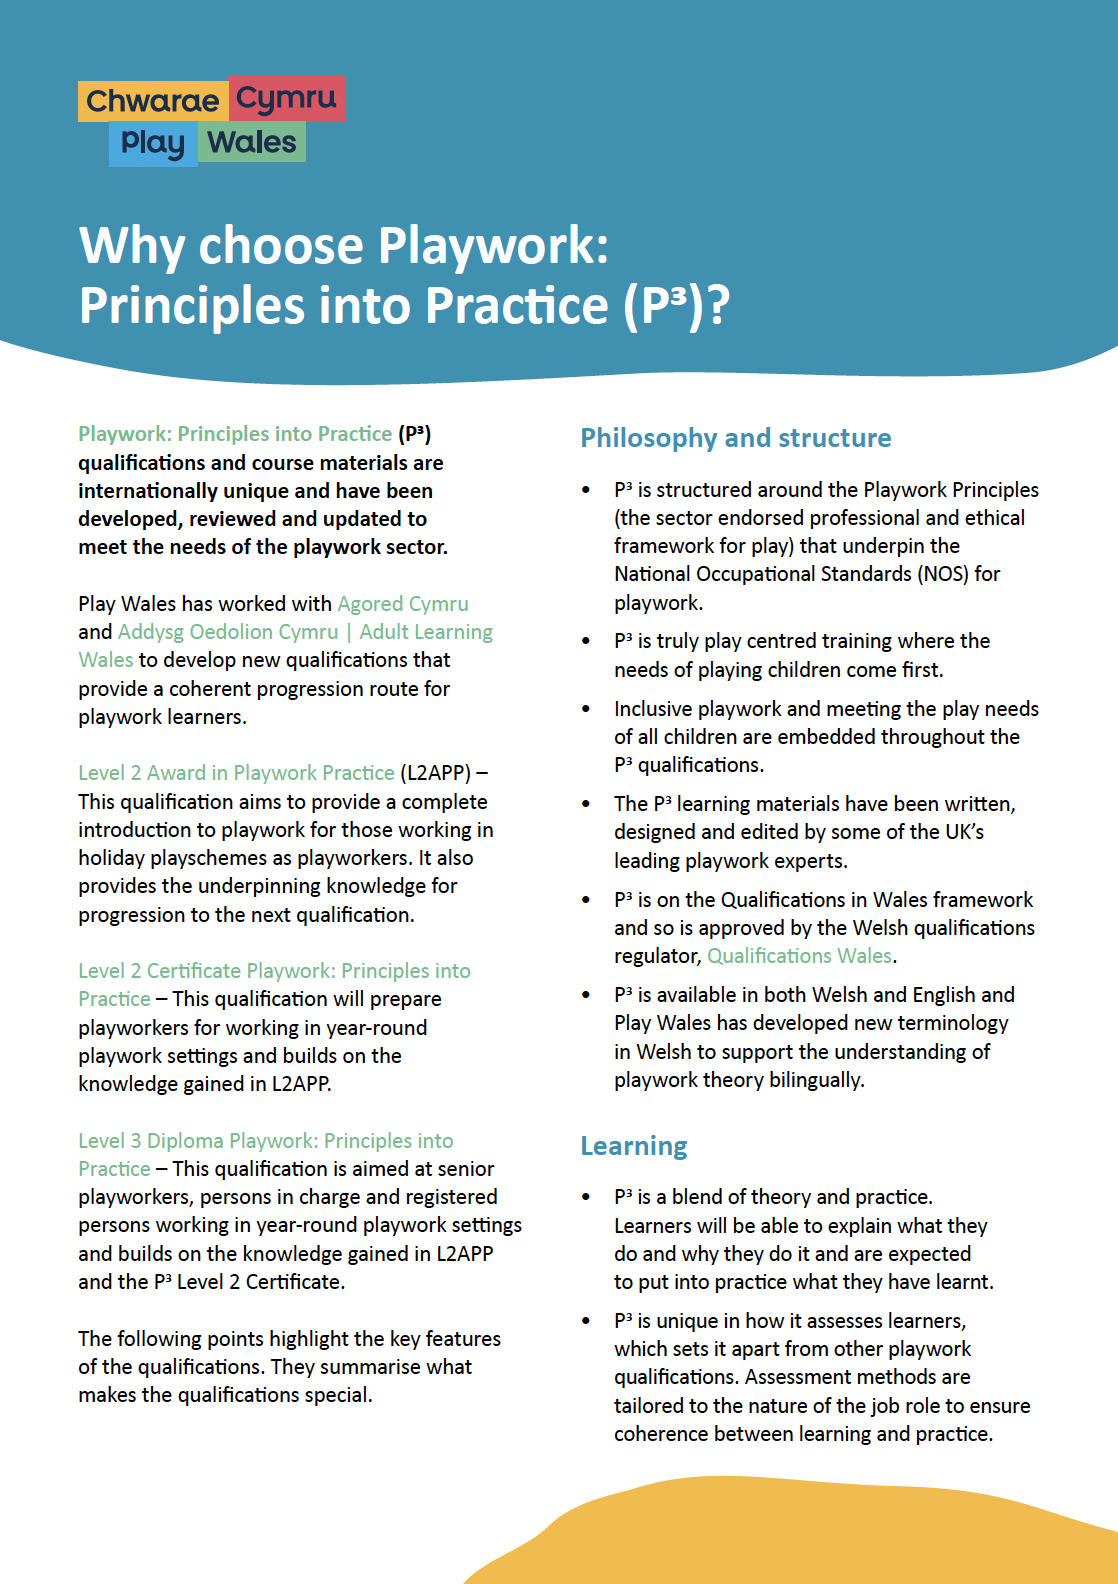 Why choose Playwork: Principles into Practice (P3)?